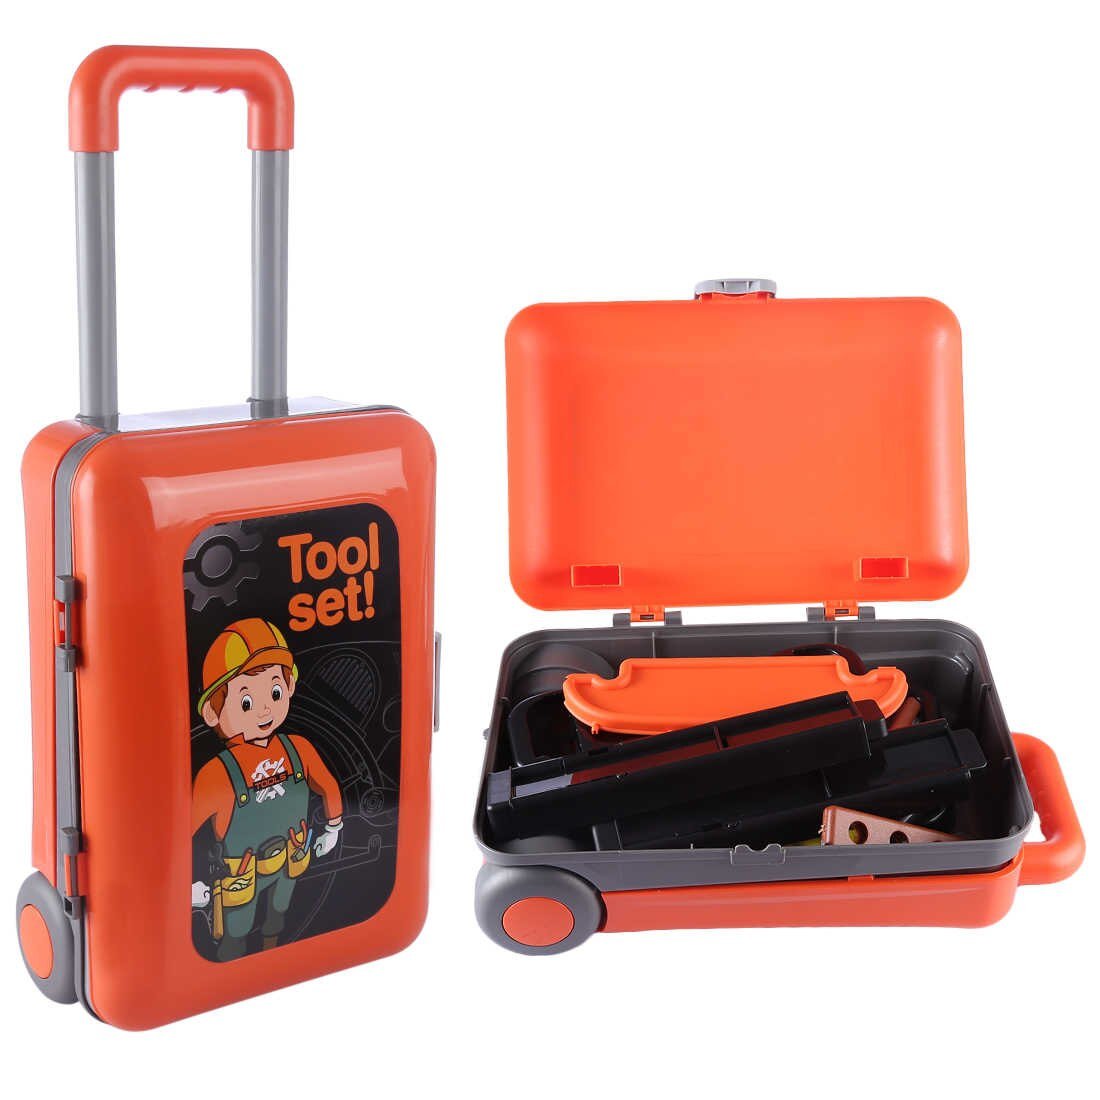 "BUDDY TOYS" TOOL SET DELUXE